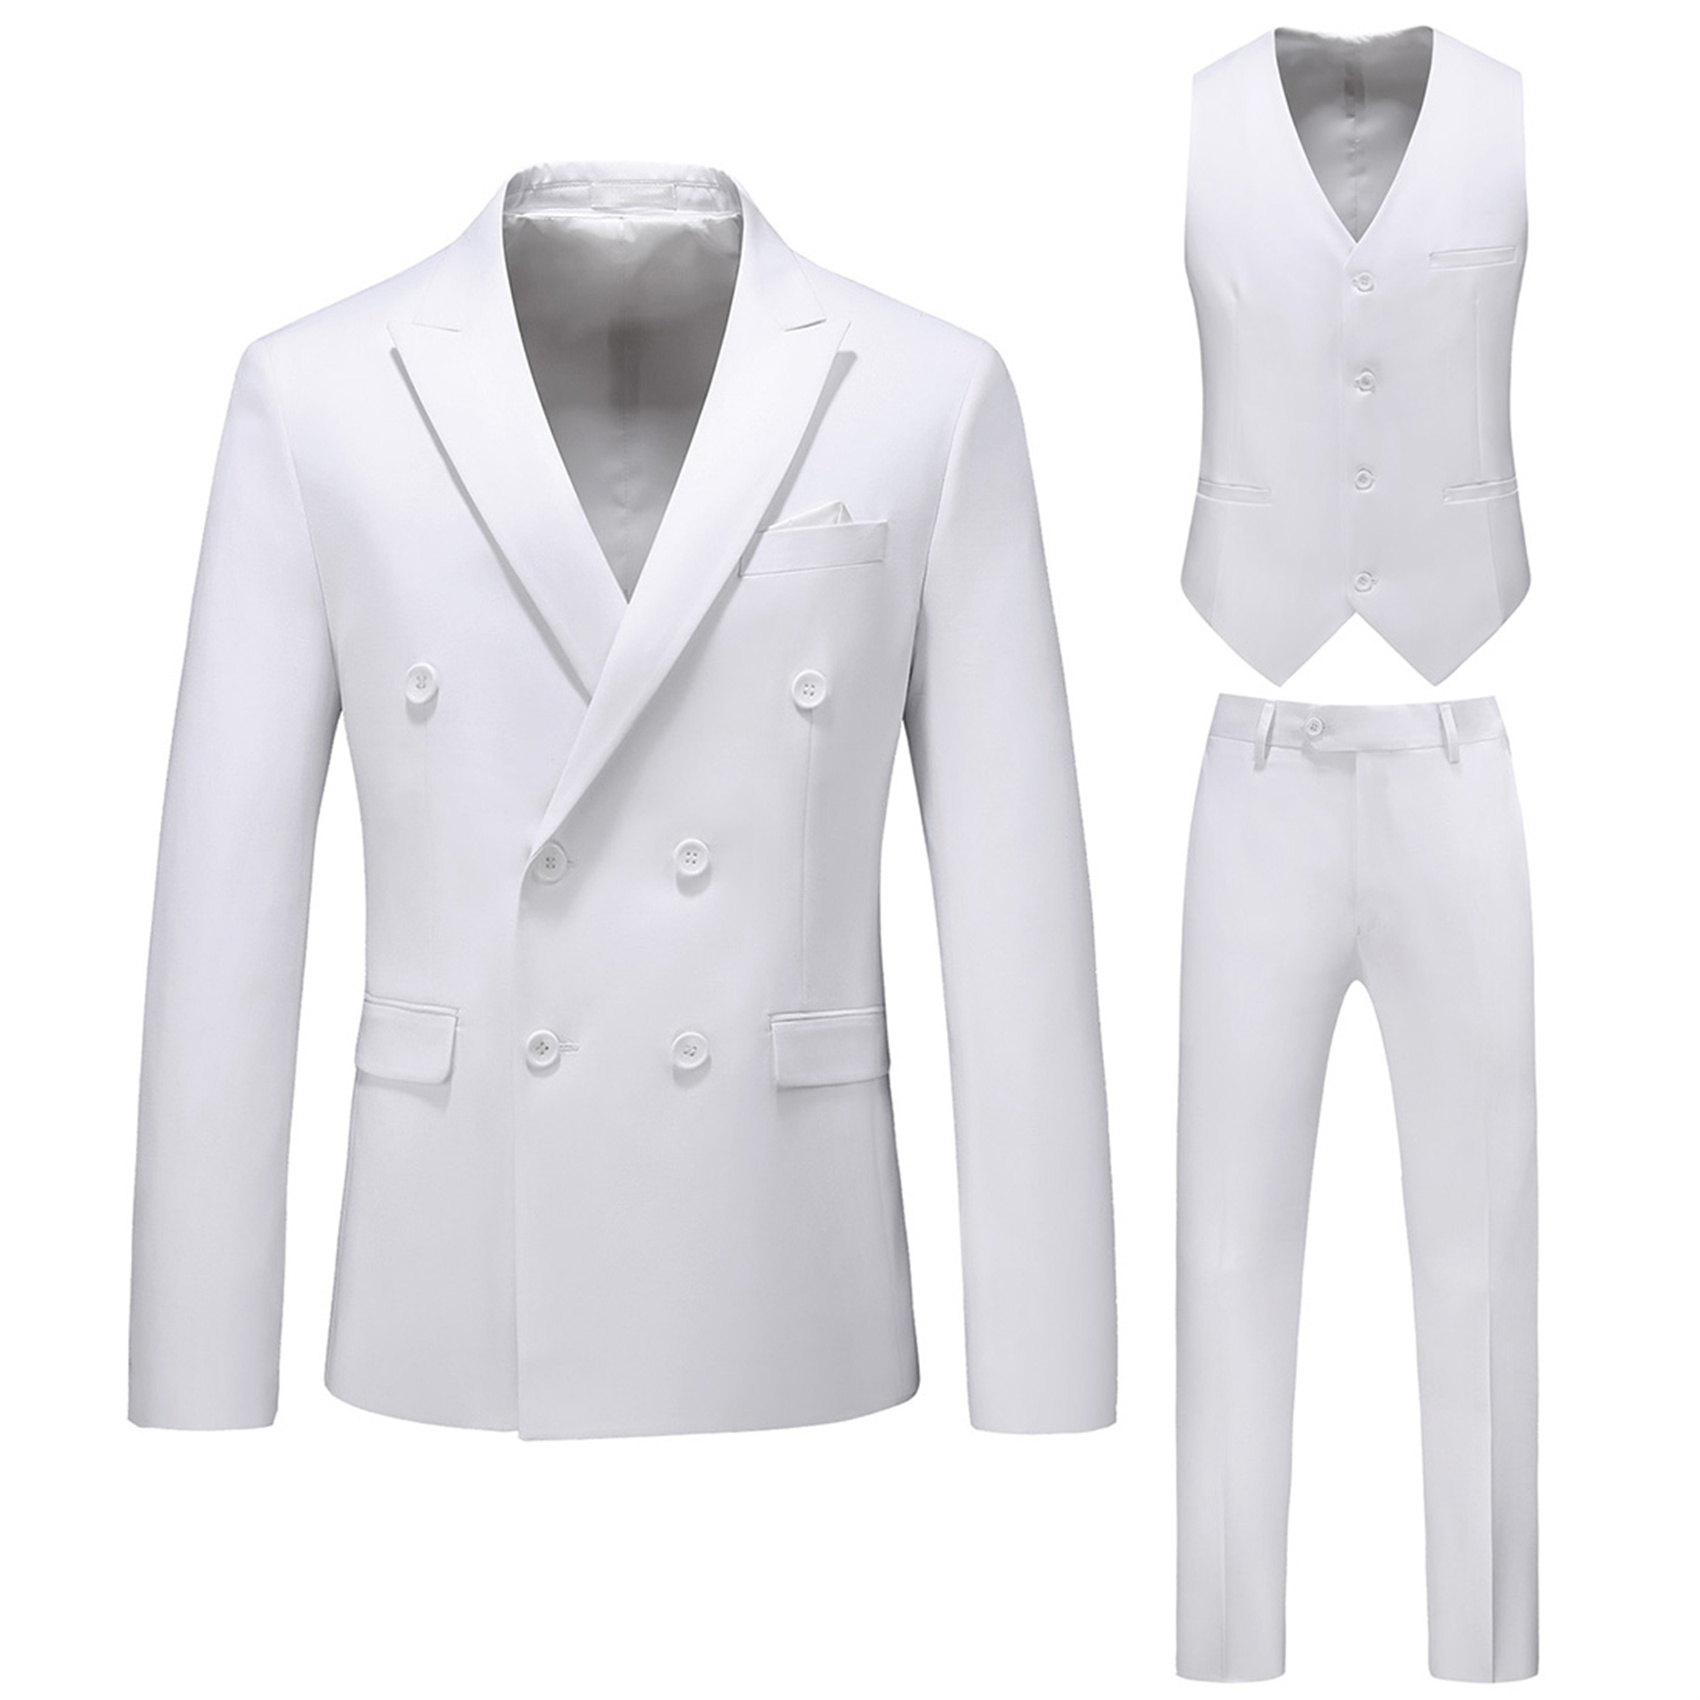 3 Piece Double Breasted Suit for Men, Slim Fit, White